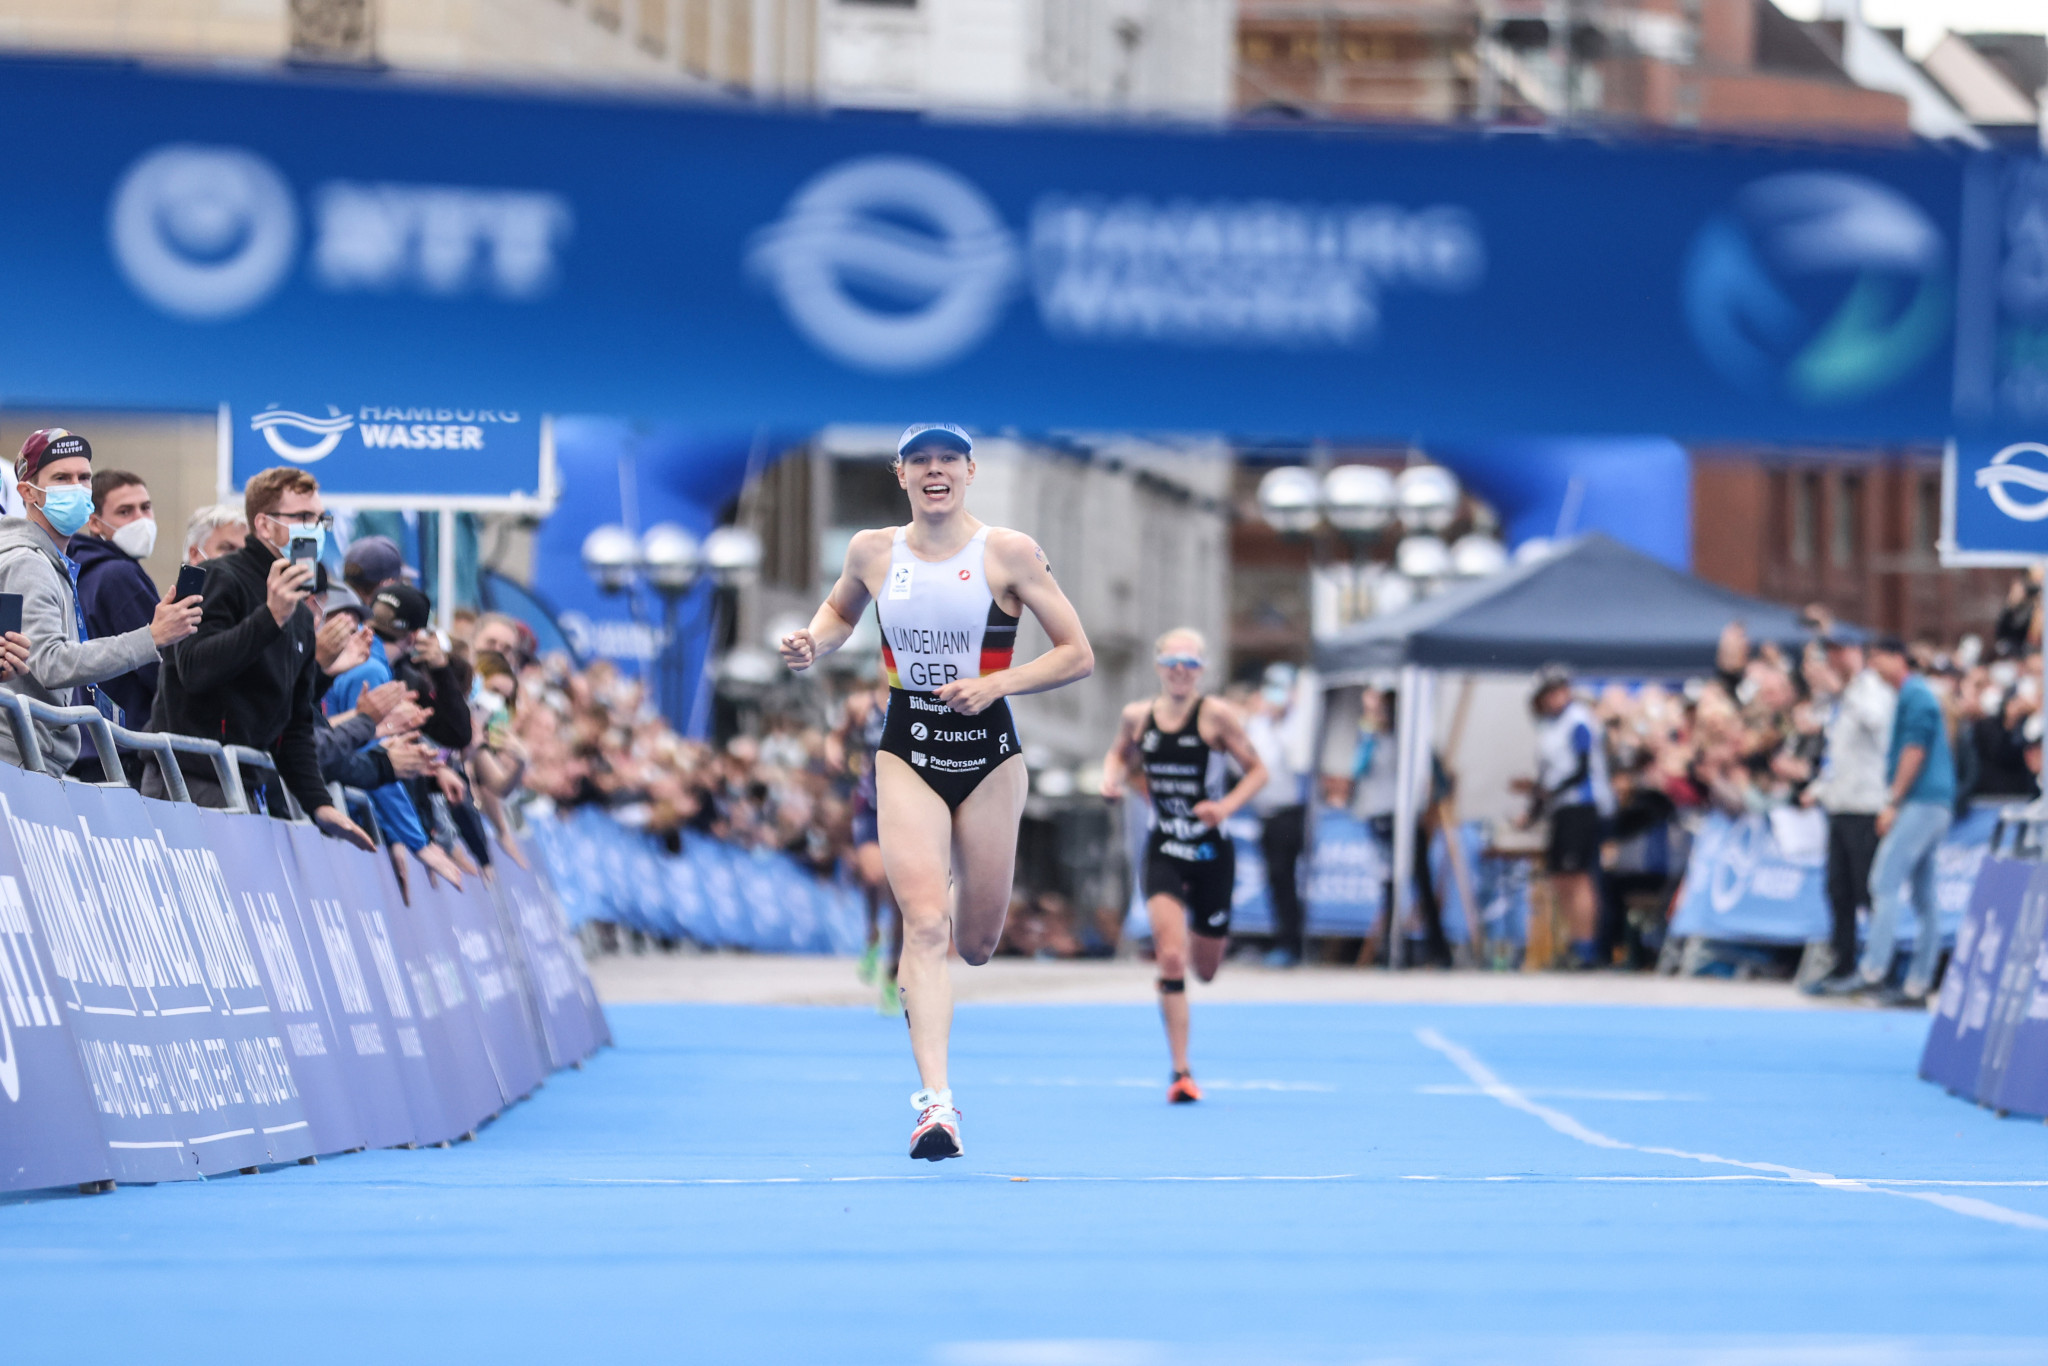 Laura Lindemann claimed her maiden World Triathlon Championship Series victory in Hamburg after a powerful run ©Getty Images